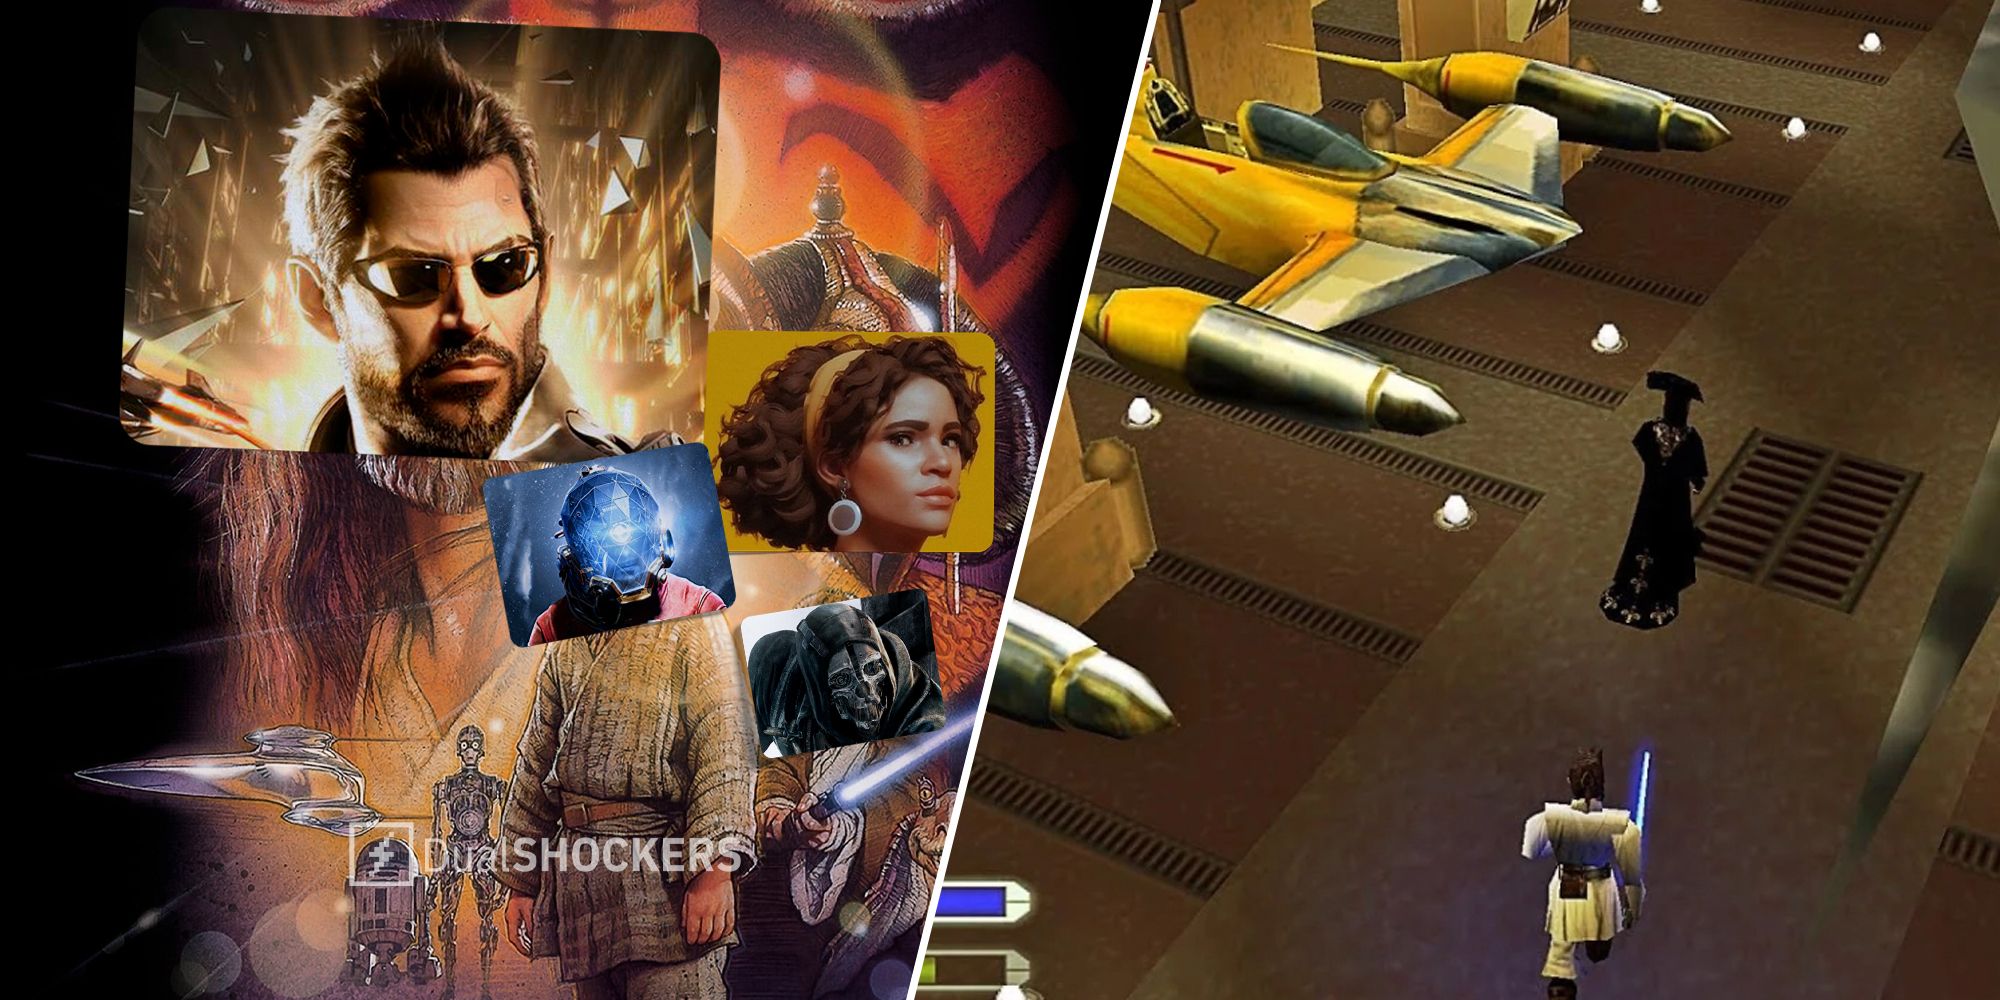 Star Wars: Episode I: The Phantom Menace for PS1 and PC, Deux Ex, Prey, Dishonored, and Deathloop characters over Star Wars characters' heads